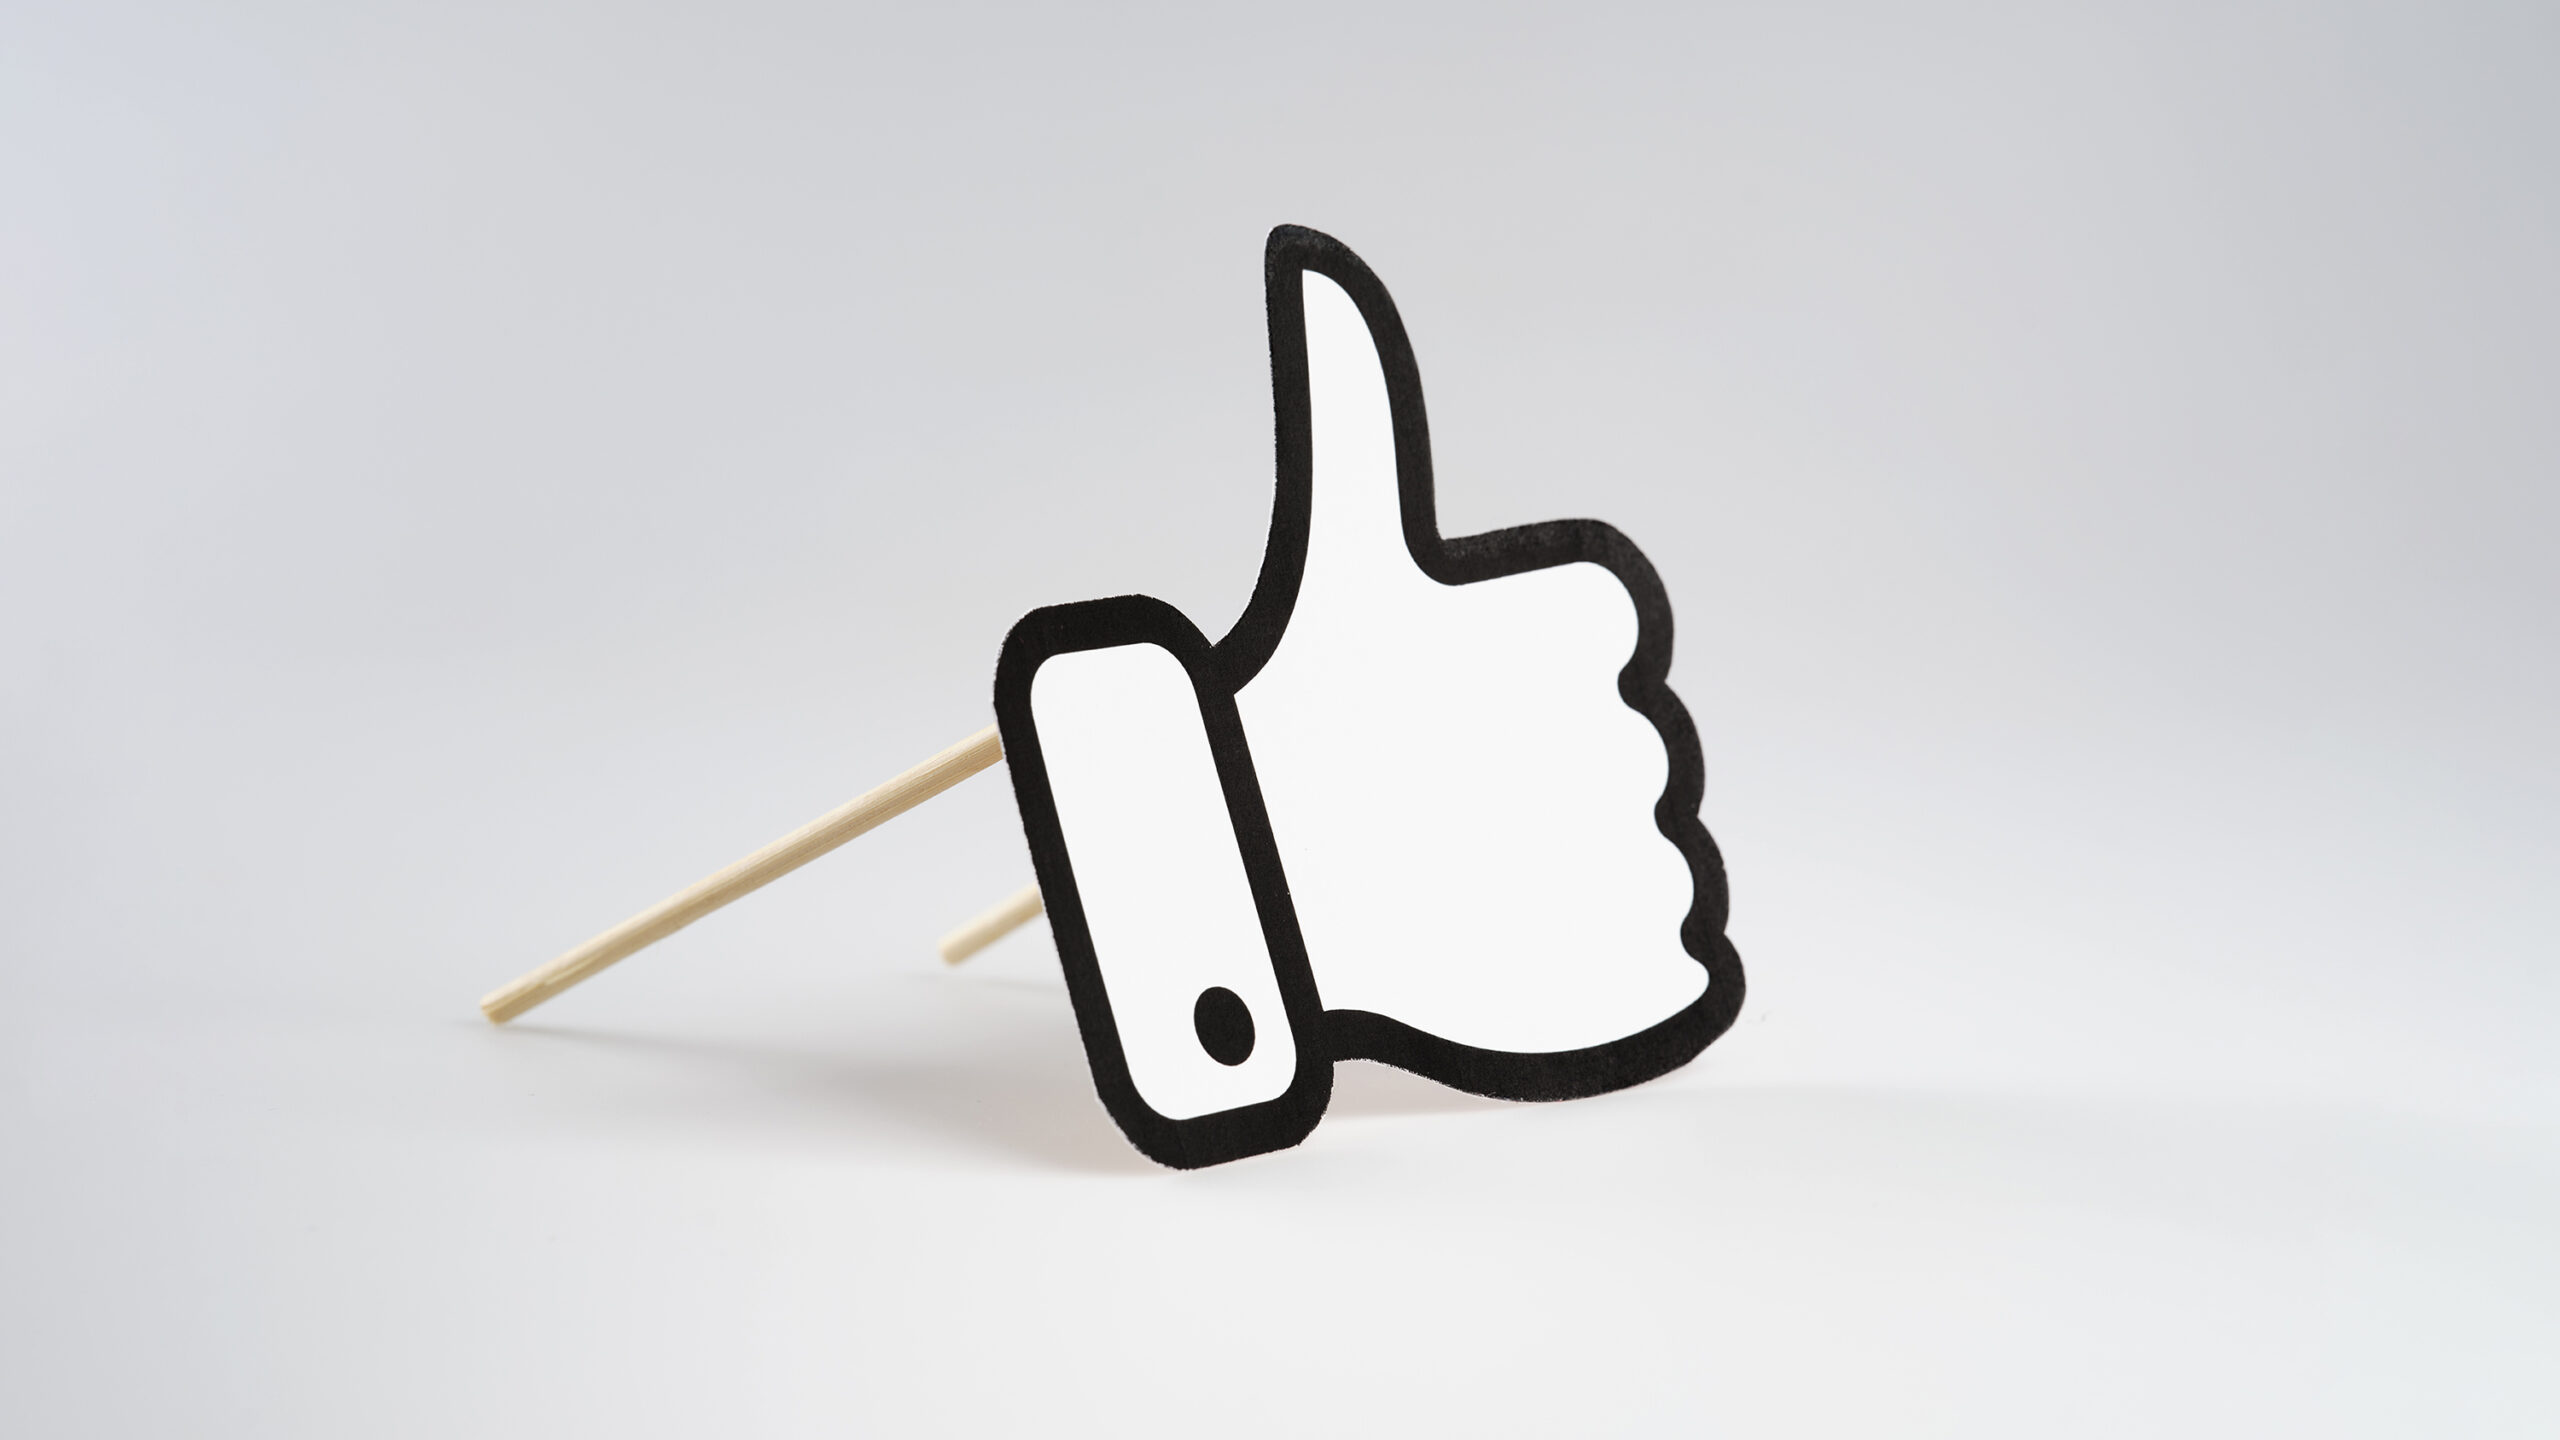 A thumbs-up/like icon, propped up as if it is a facade on a building.